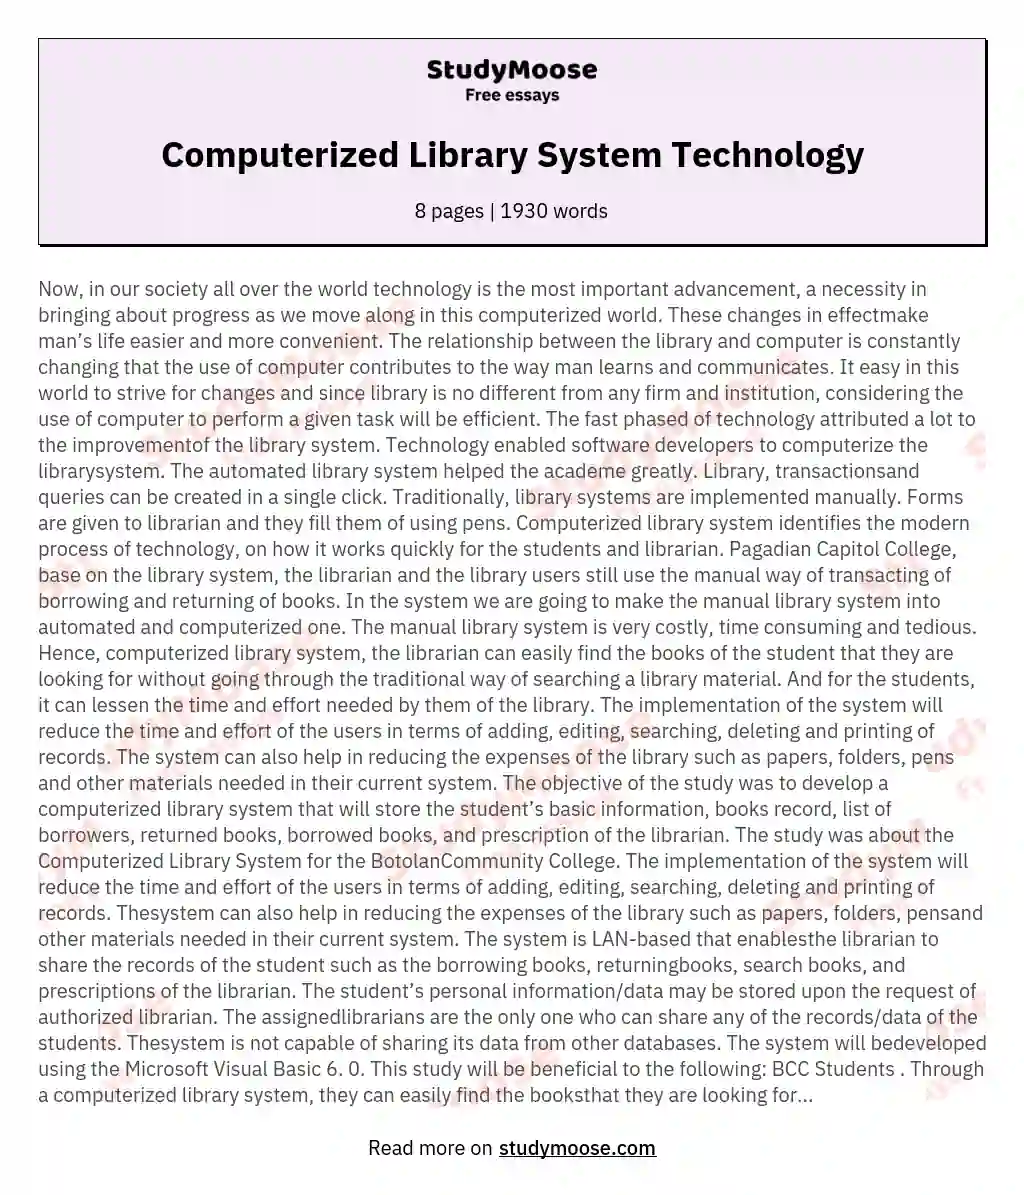 Computerized Library System Technology essay